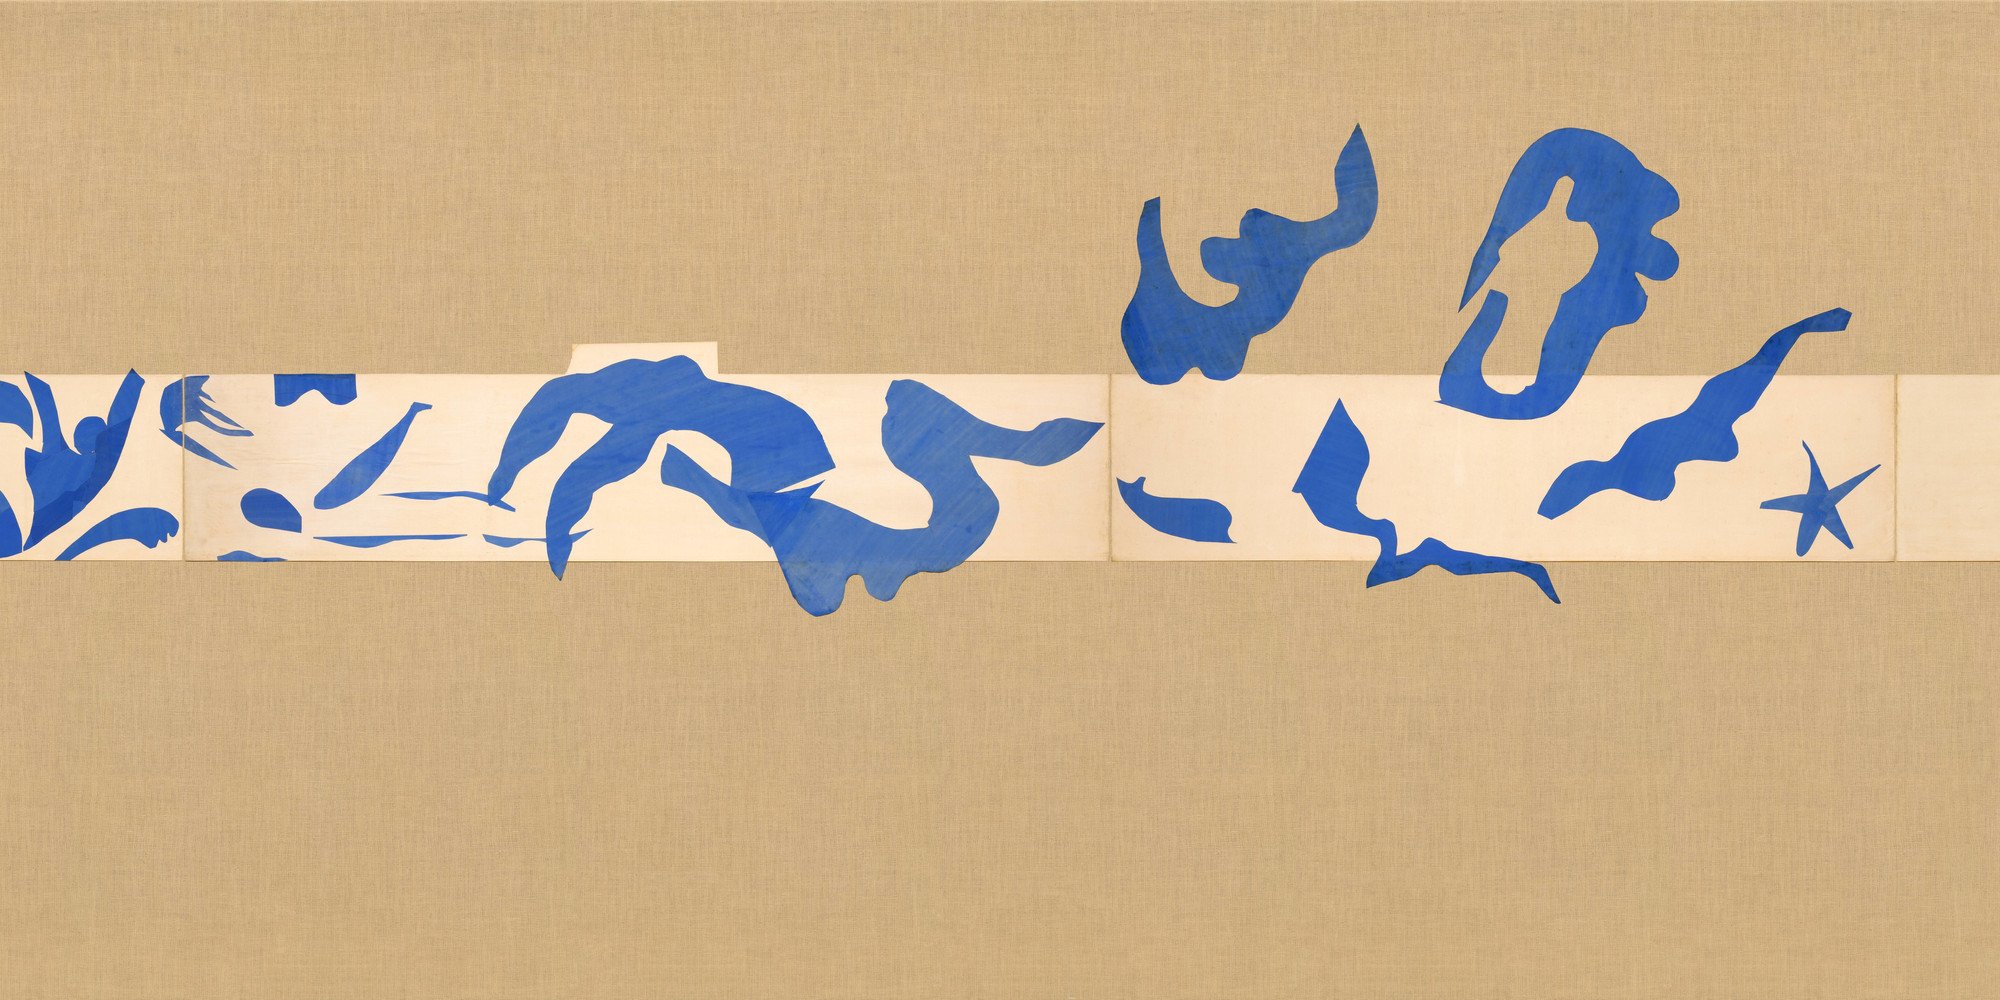 Henri Matisse. The Swimming Pool, Maquette for ceramic (realized 1999 and 2005). 1952. Gouache on paper, cut and pasted, on painted paper, overall 73&#34; × 53&#39; 11&#34; (185.4 × 1643.3 cm). Installed as nine panels in two parts on burlap-covered walls 11&#39; 4&#34; (345.4 cm) high. Frieze installed at a height of 5&#39; 5&#34; (165 cm). Mrs. Bernard F. Gimbel Fund. Conservation was made possible by the Bank of America Art Conservation Project. © 2019 Succession H. Matisse/Artists Rights Society (ARS), New York